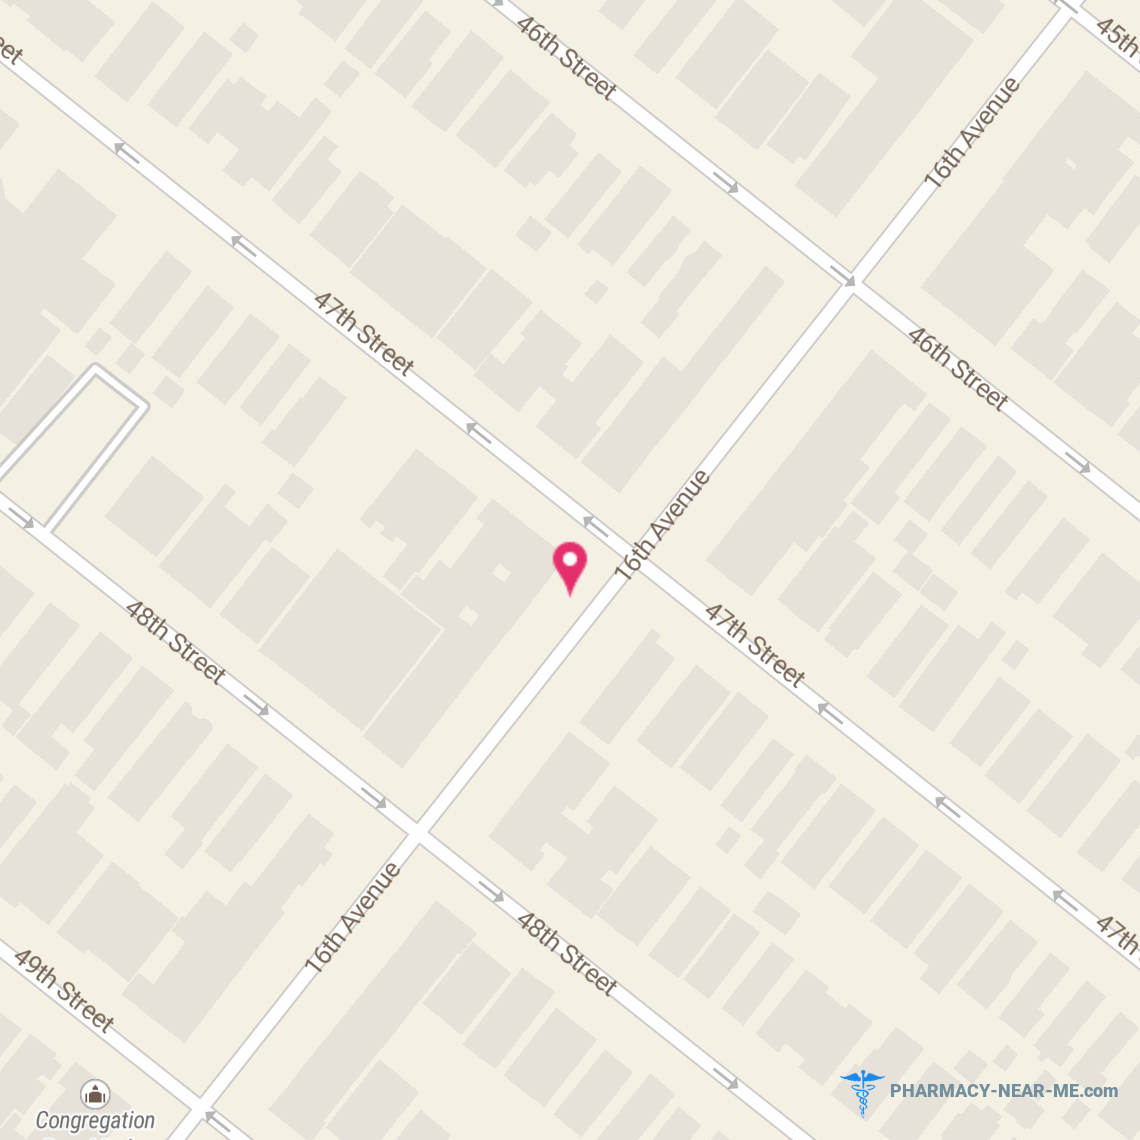 DUANE READE #14508 - Pharmacy Hours, Phone, Reviews & Information: 4714 16th Ave, Brooklyn, New York 11219, United States